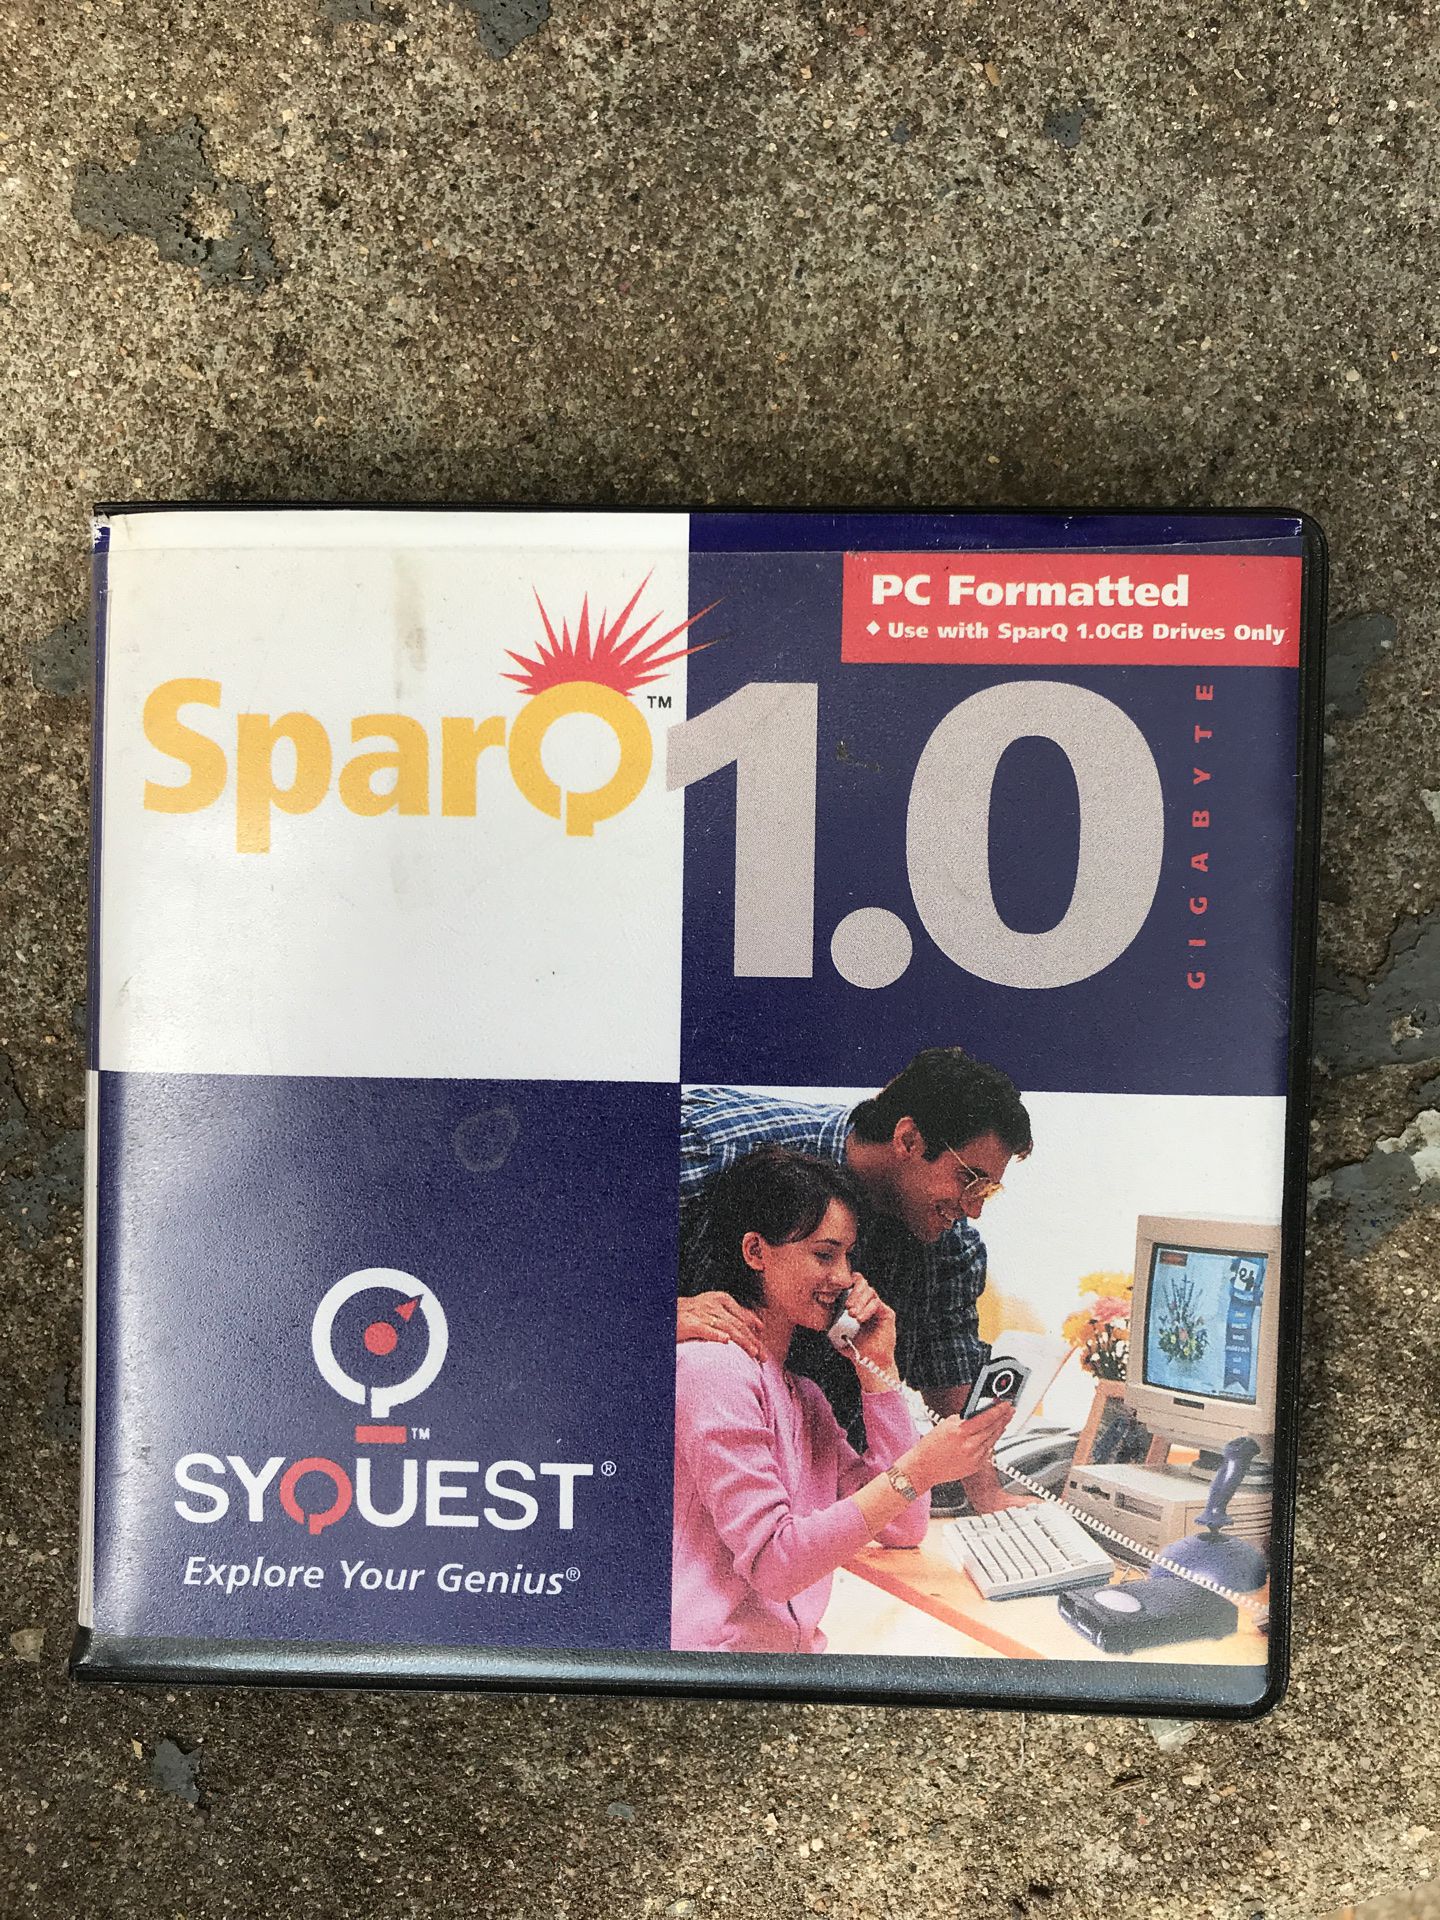 Sparq 1.0 syquest pc formatted disk